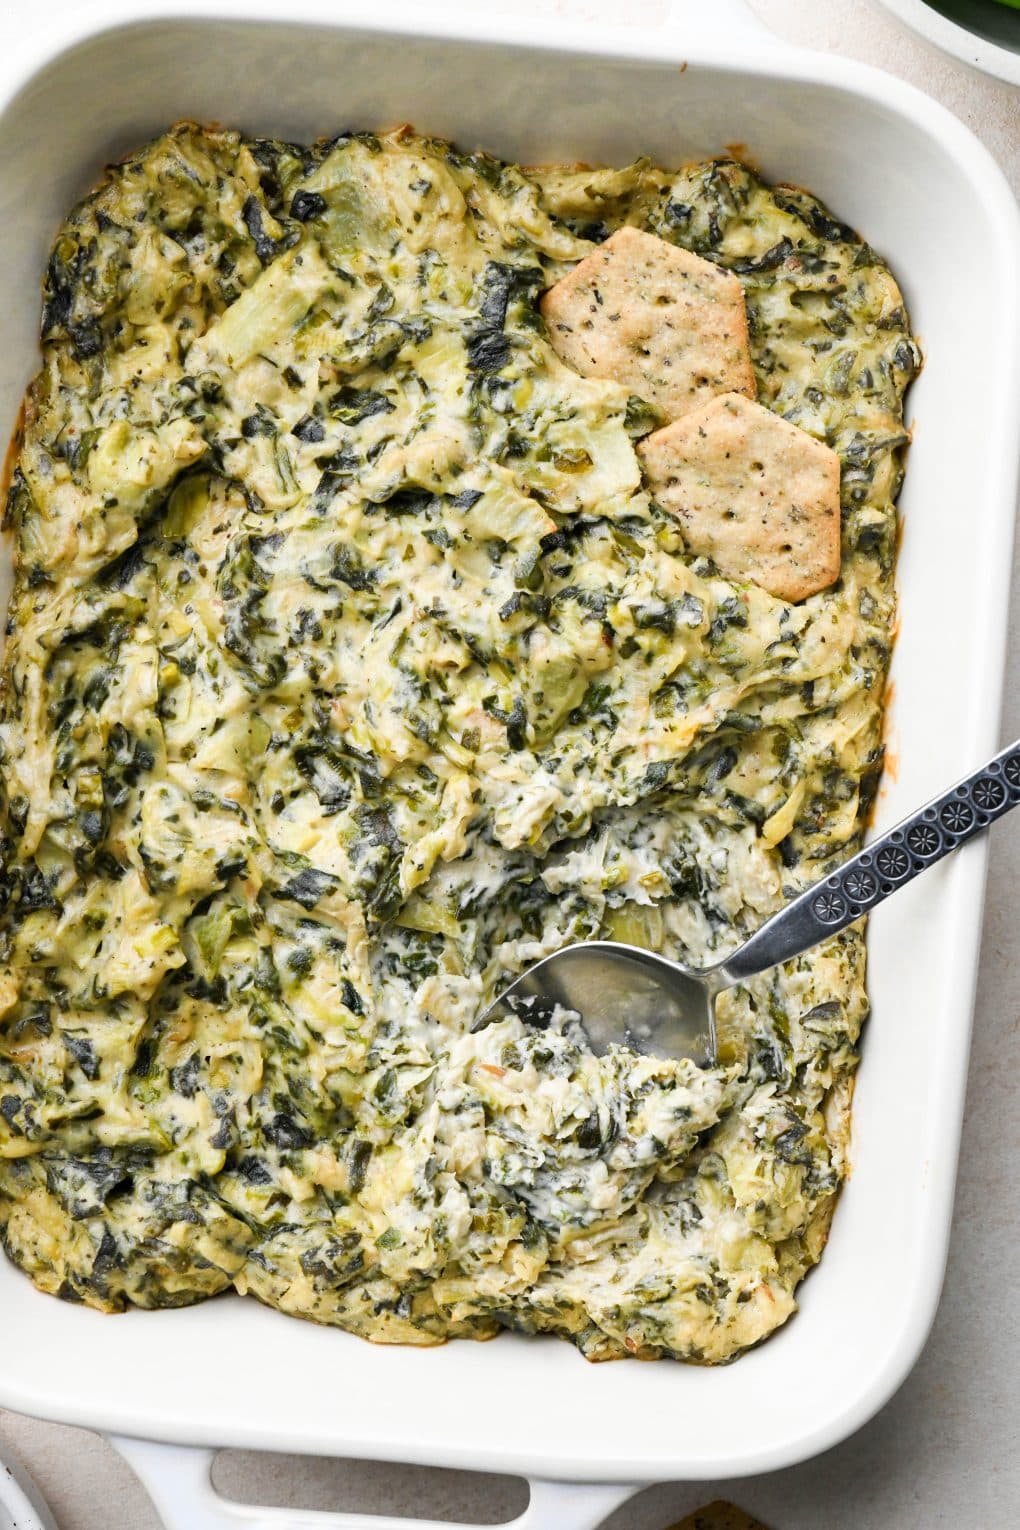 Baked dairy free spinach artichoke dip in a small rectangular baking dish with some crackers tucked into the dip and a spoon scooping some out.